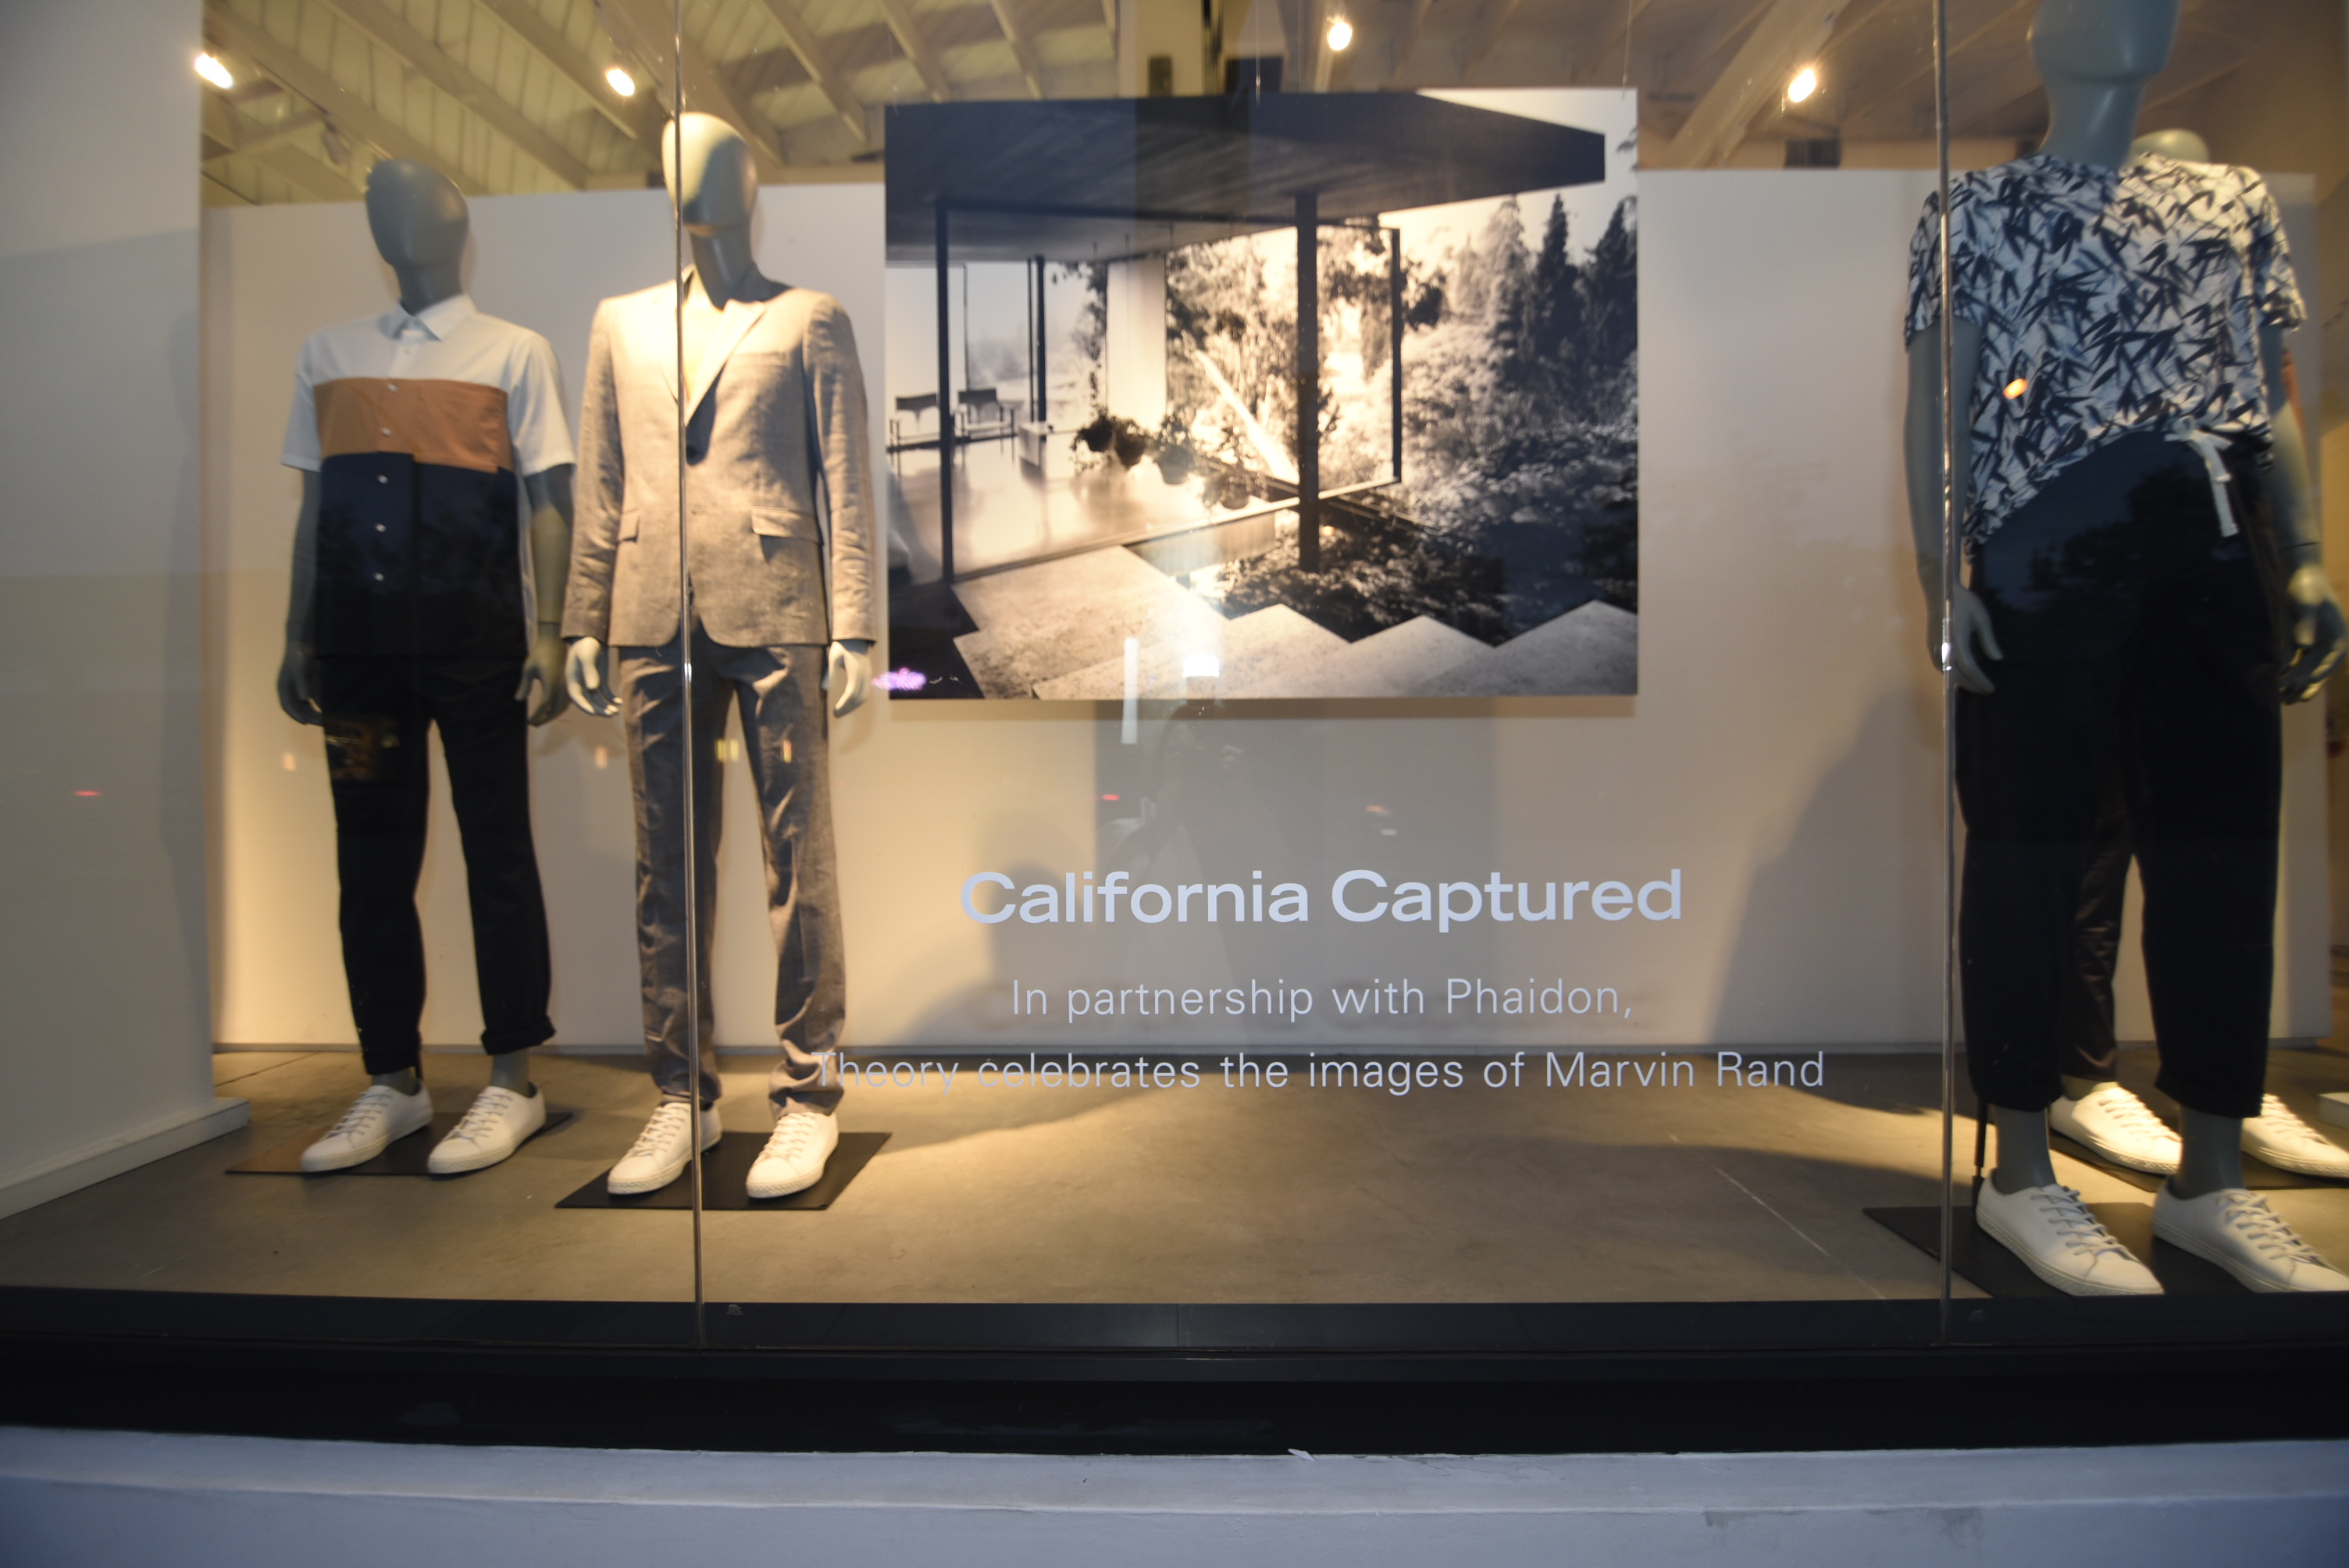 Our California Captured launch event at Theory